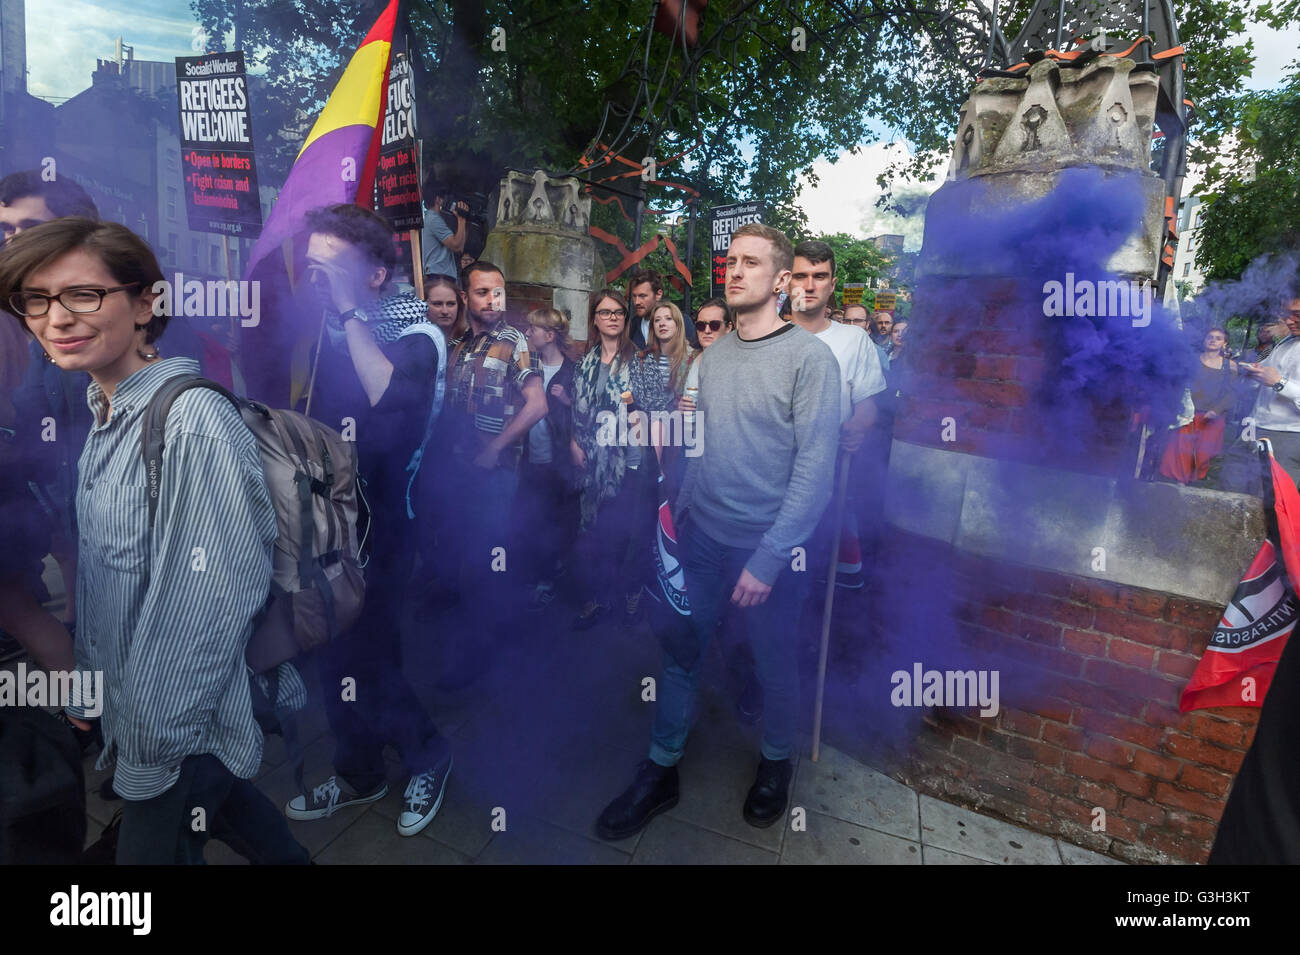 London, UK. June 24th 2016. Over a thousand protesters leave Altab Ali Park through the smoke form a flare on a long march to the offices of News International on the day after the UK voted to leave the EU. They were protesting against racism, for migrant rights and against fascist violence and argue that migration and immigrants have been attacked and scapegoated not only by both Remain and Leave campaigns but by mainstream parties and media over more than 20 years, stoking up hatred by insisting immigrants are a 'problem'. Peter Marshall/Alamy Live News Stock Photo